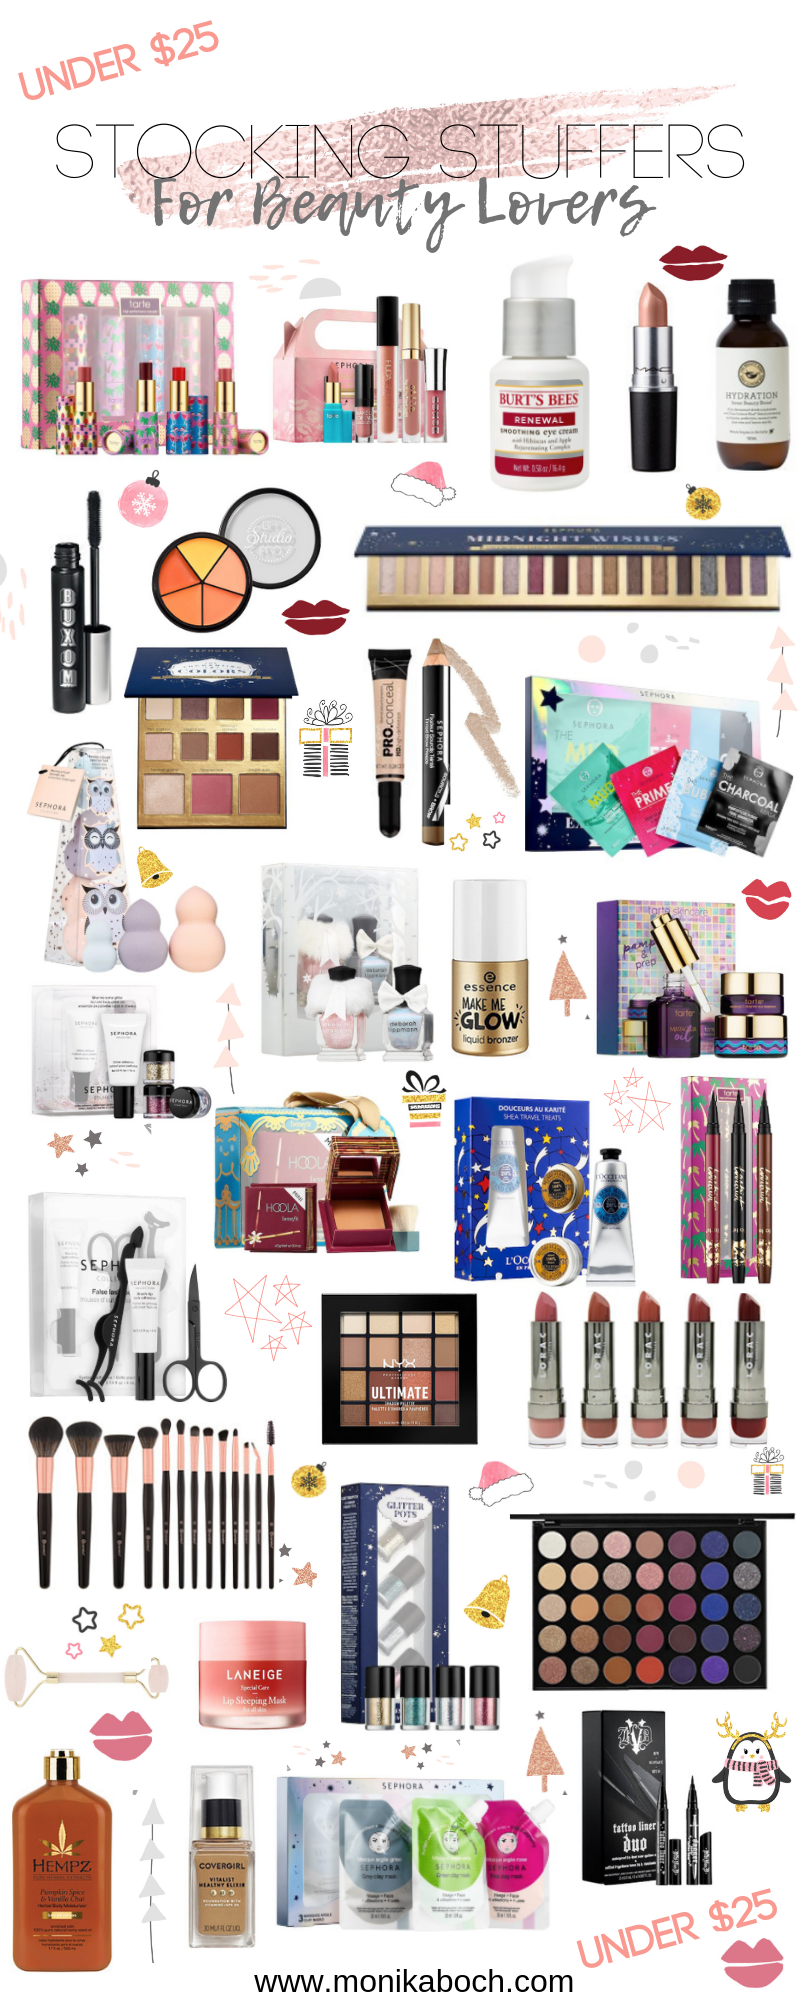 https://monikaboch.com/wp-content/uploads/2018/11/Stocking-Stuffers-for-beauty-lovers-1.png